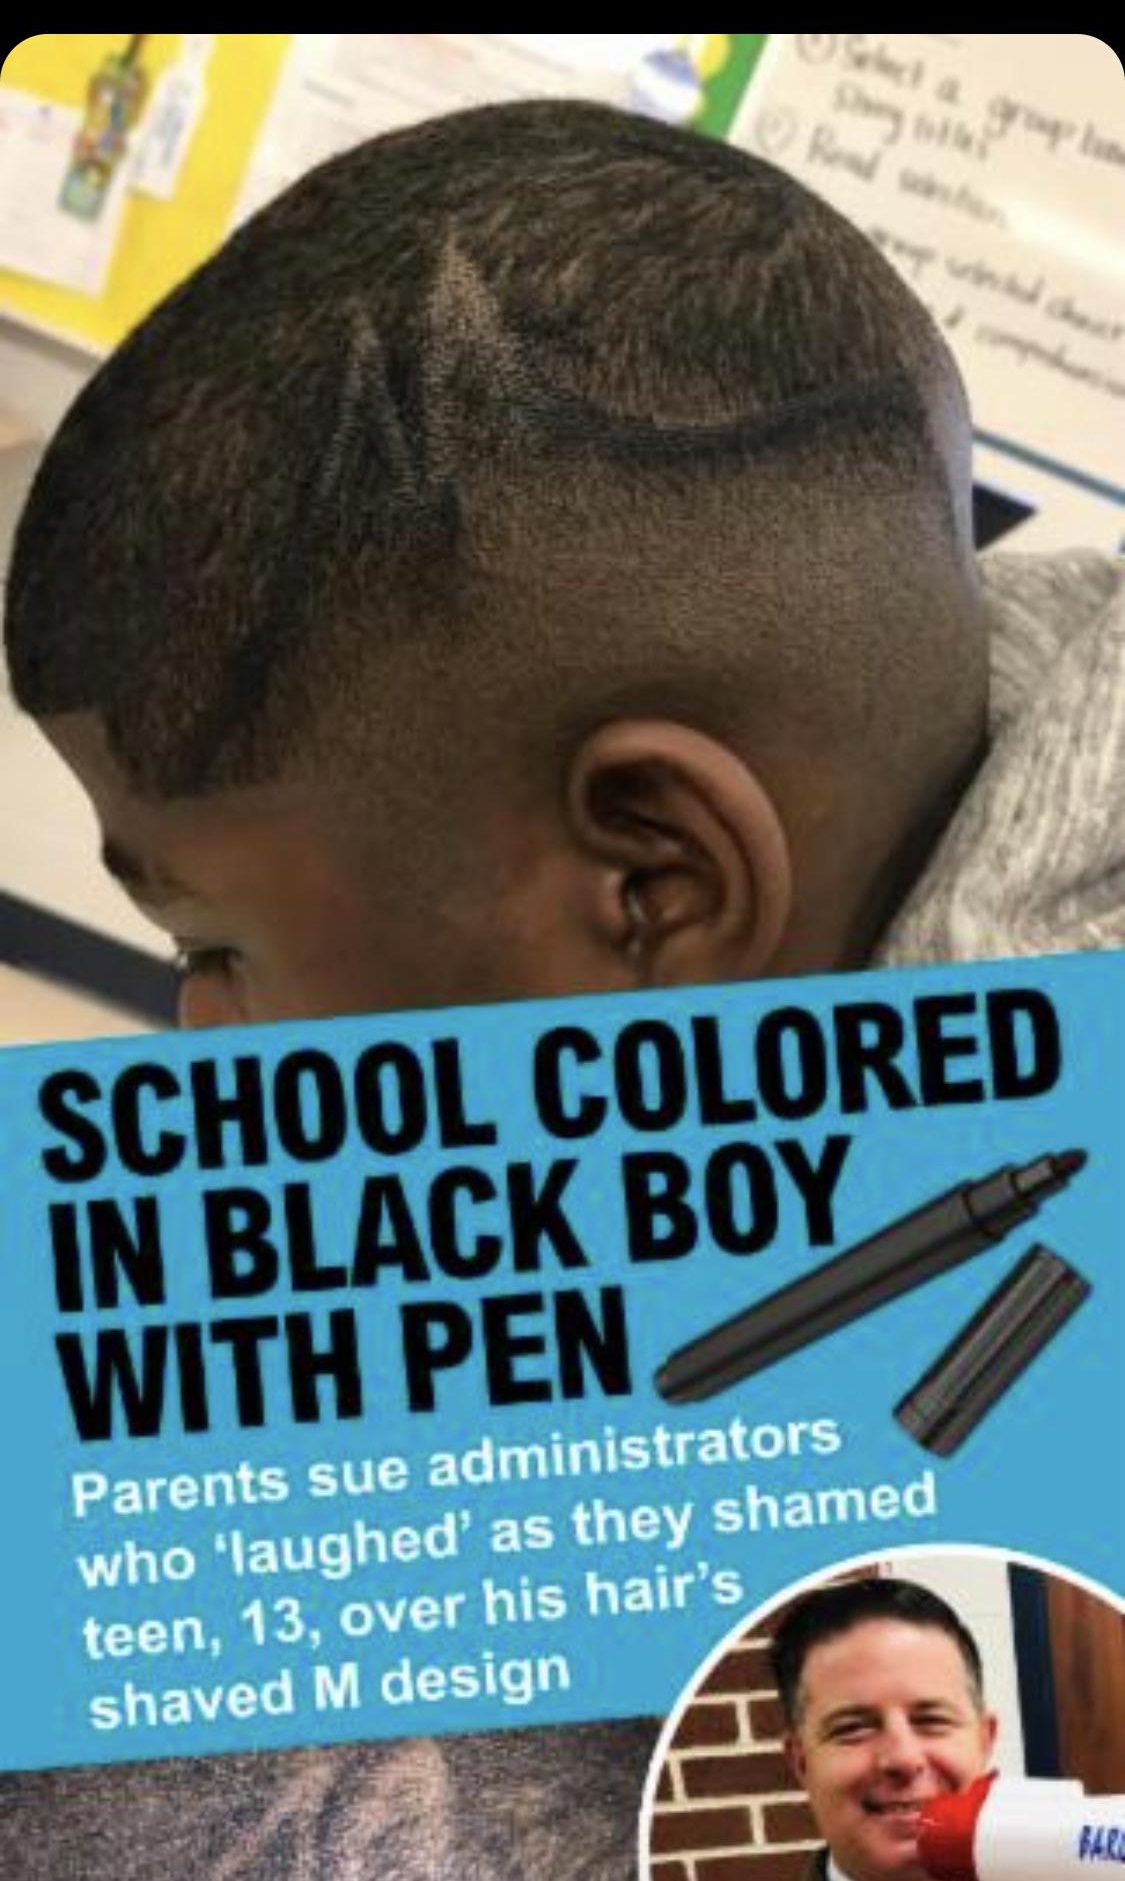 museum boijmans van beuningen - School Colored In Black Boy With Pen Parents sue administrators who 'laughed as they shamed teen, 13, over his hair's shaved M design